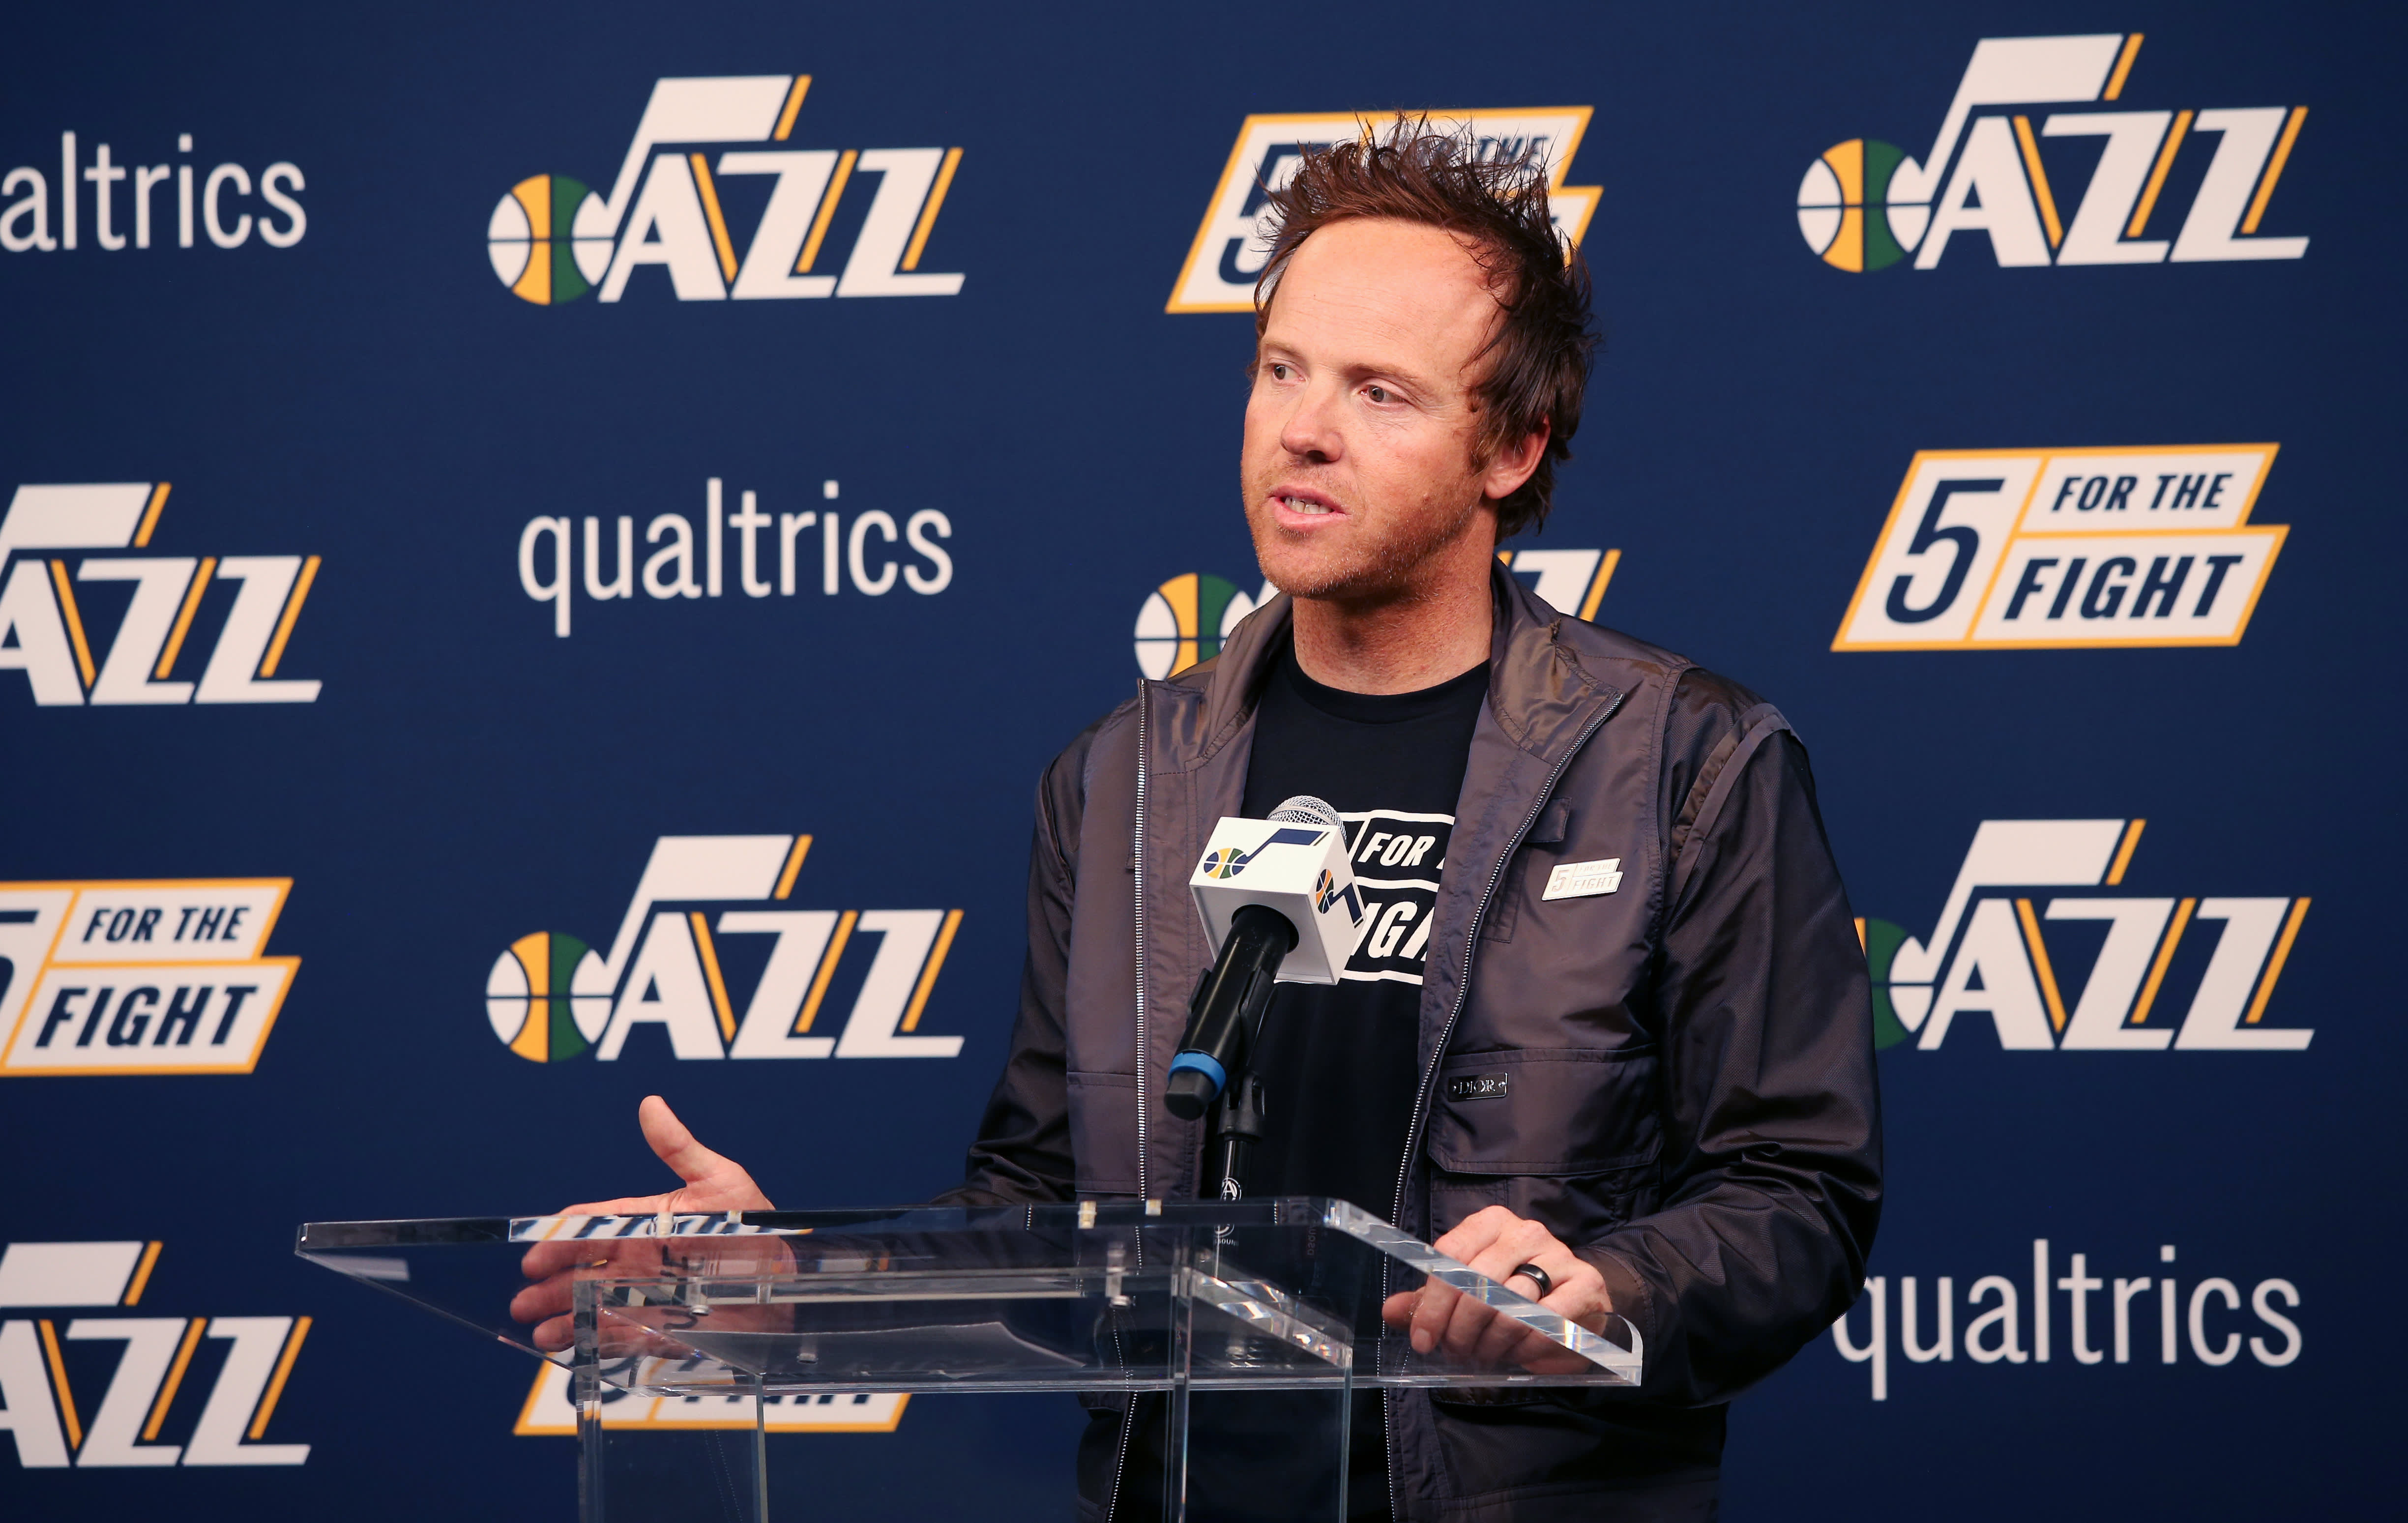 Utah Jazz owner Ryan Smith leads Qualtrics’ IPO as the team moves to